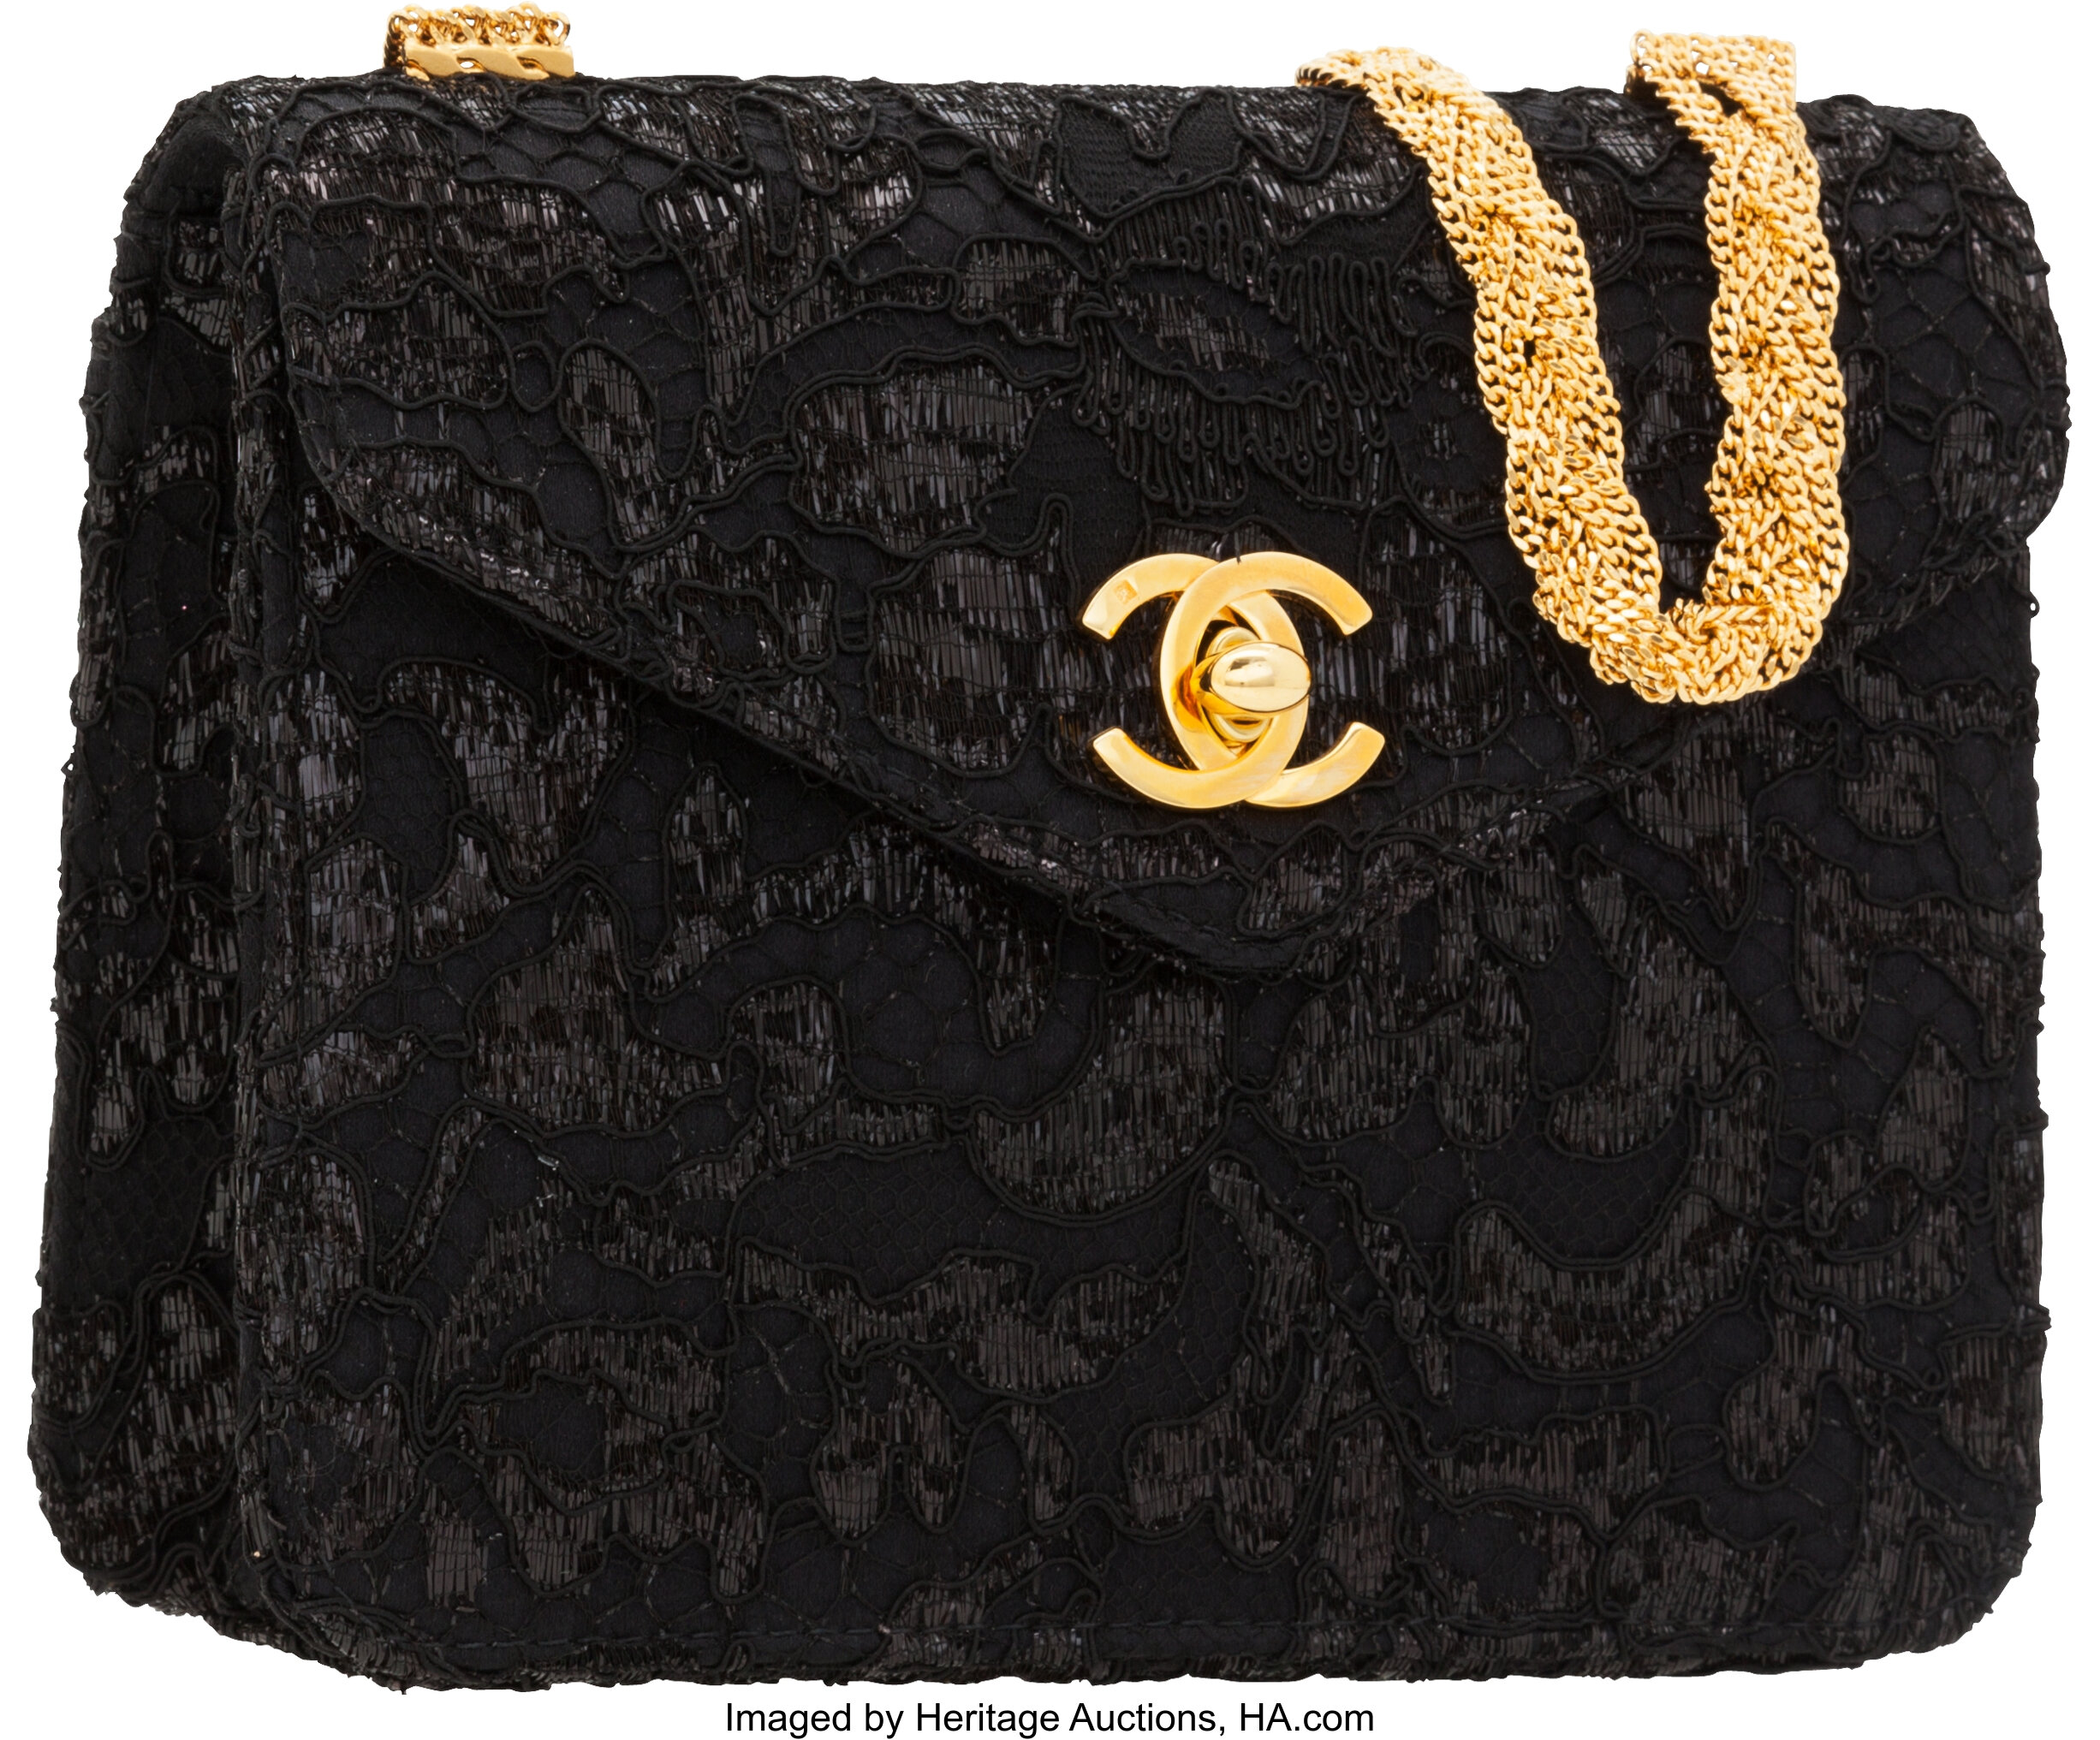 Chanel Black Satin Evening Bag with Lace Overlay & Braided Gold, Lot  #56309